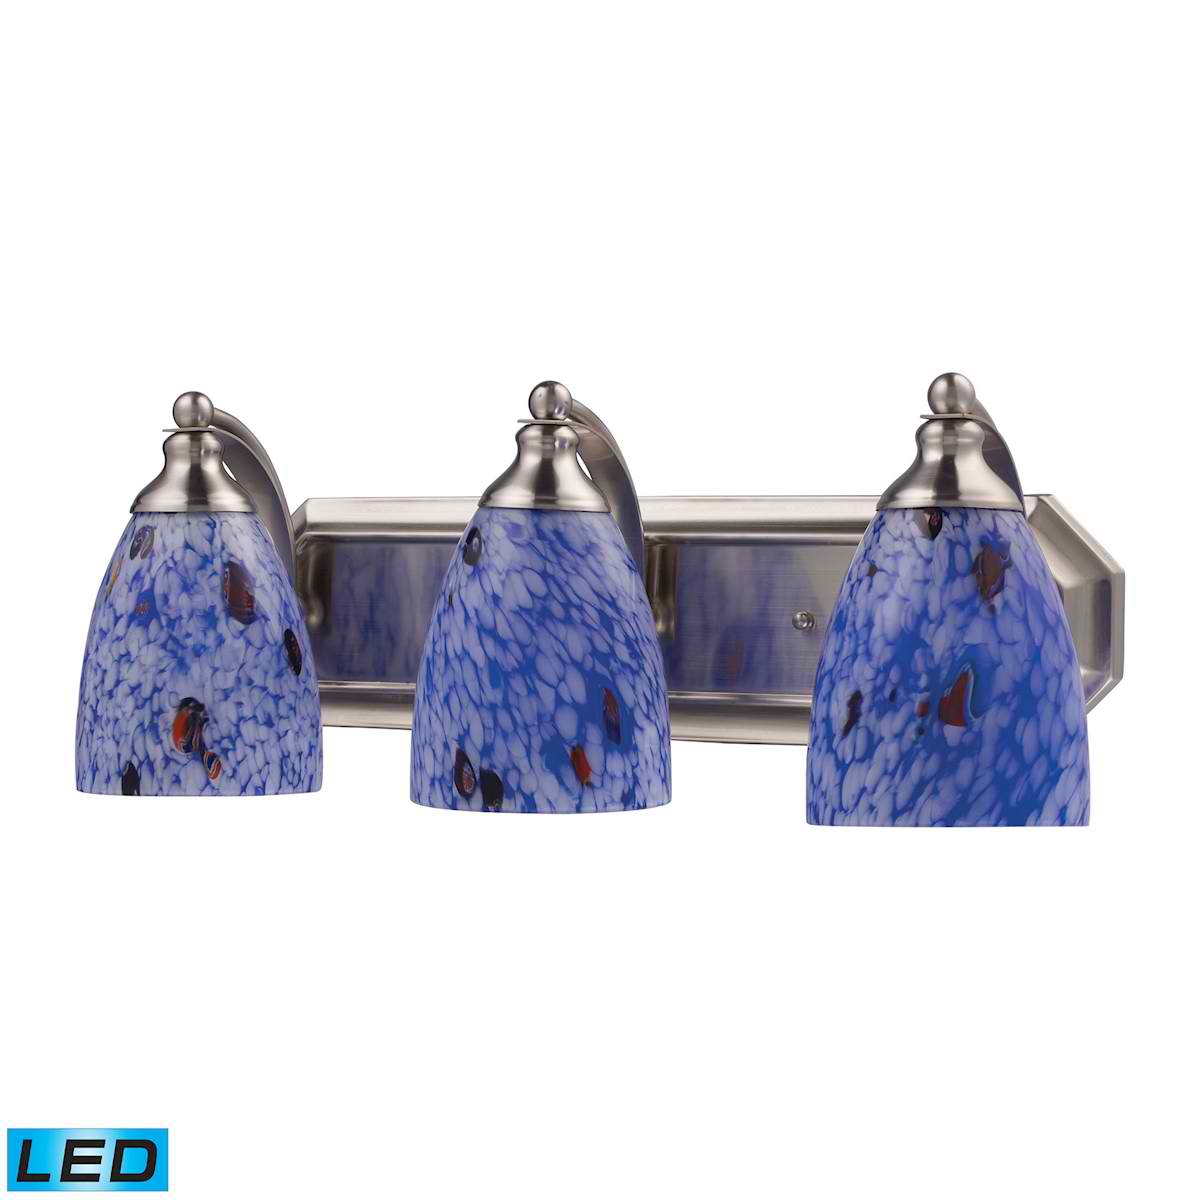 3 Light Vanity in Satin Nickel and Starburst Blue Glass - LED, 800 Lumens (2400 Lumens Total) with Full Scale